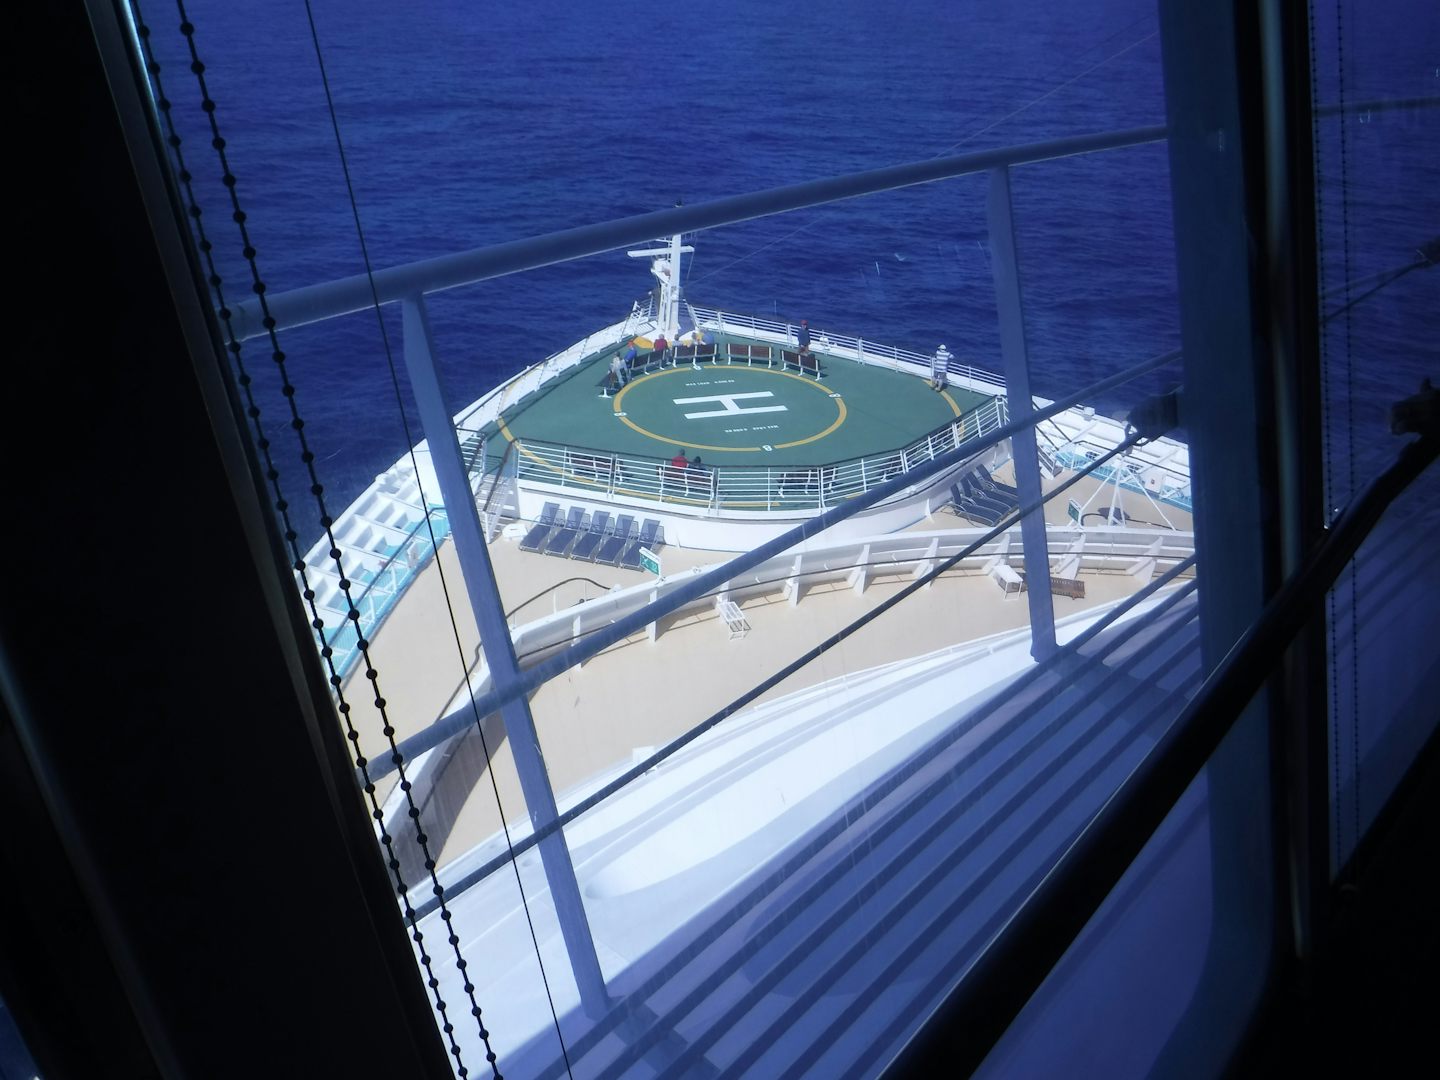 The Liberty of the Seas has a helicopter landing pad in case of dire emerge